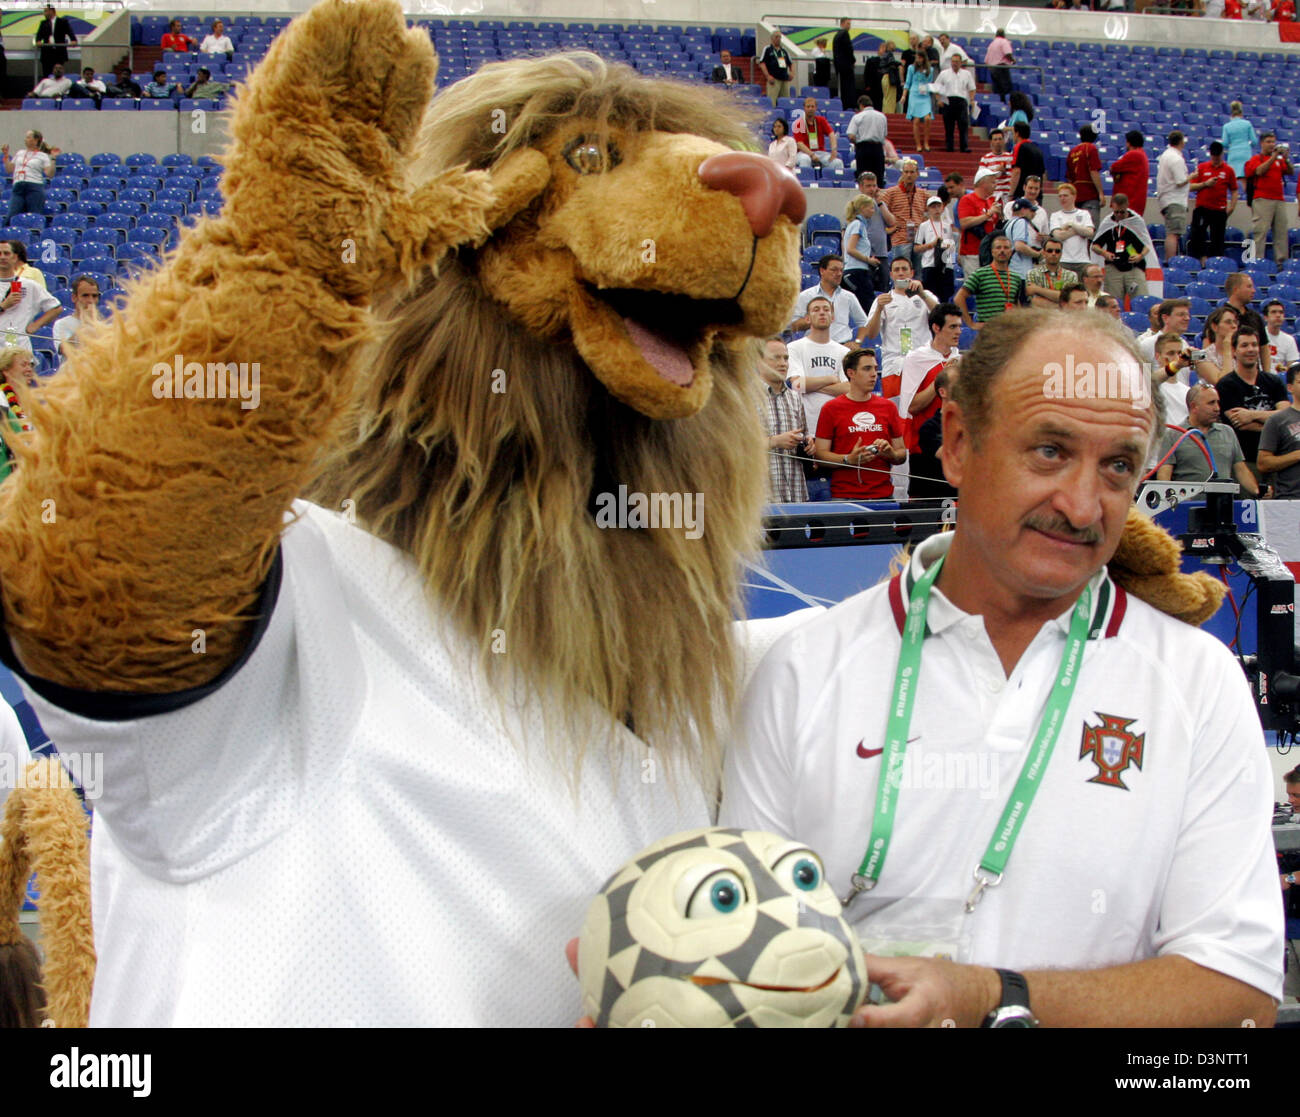 Portuguese national coach Brazilian Luiz Felipe Scolari (R) stands close to FIFA World Cup mascot 'Goleo' prior to the 2006 FIFA World Cup Quarter-finals match England vs Portugal in Gelsenkirchen, Germany, Saturday 01 July 2006. DPA/BERND THISSEN +++ Mobile Services OUT +++ Please refer to FIFA's terms and conditions +++(c) dpa - Bildfunk+++ Stock Photo